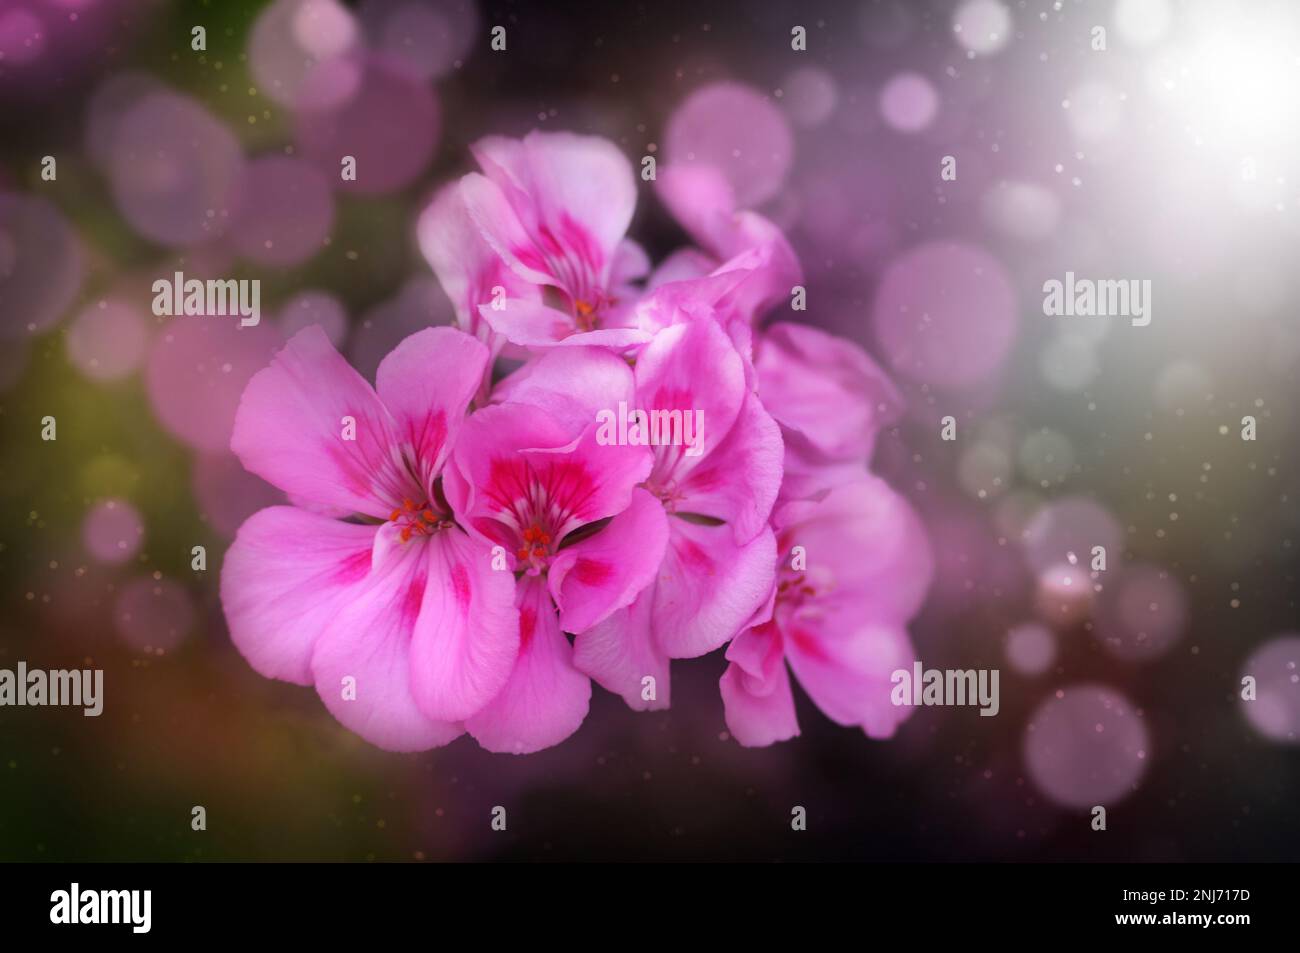 Bunch of pink geraniums with a blurred background Stock Photo